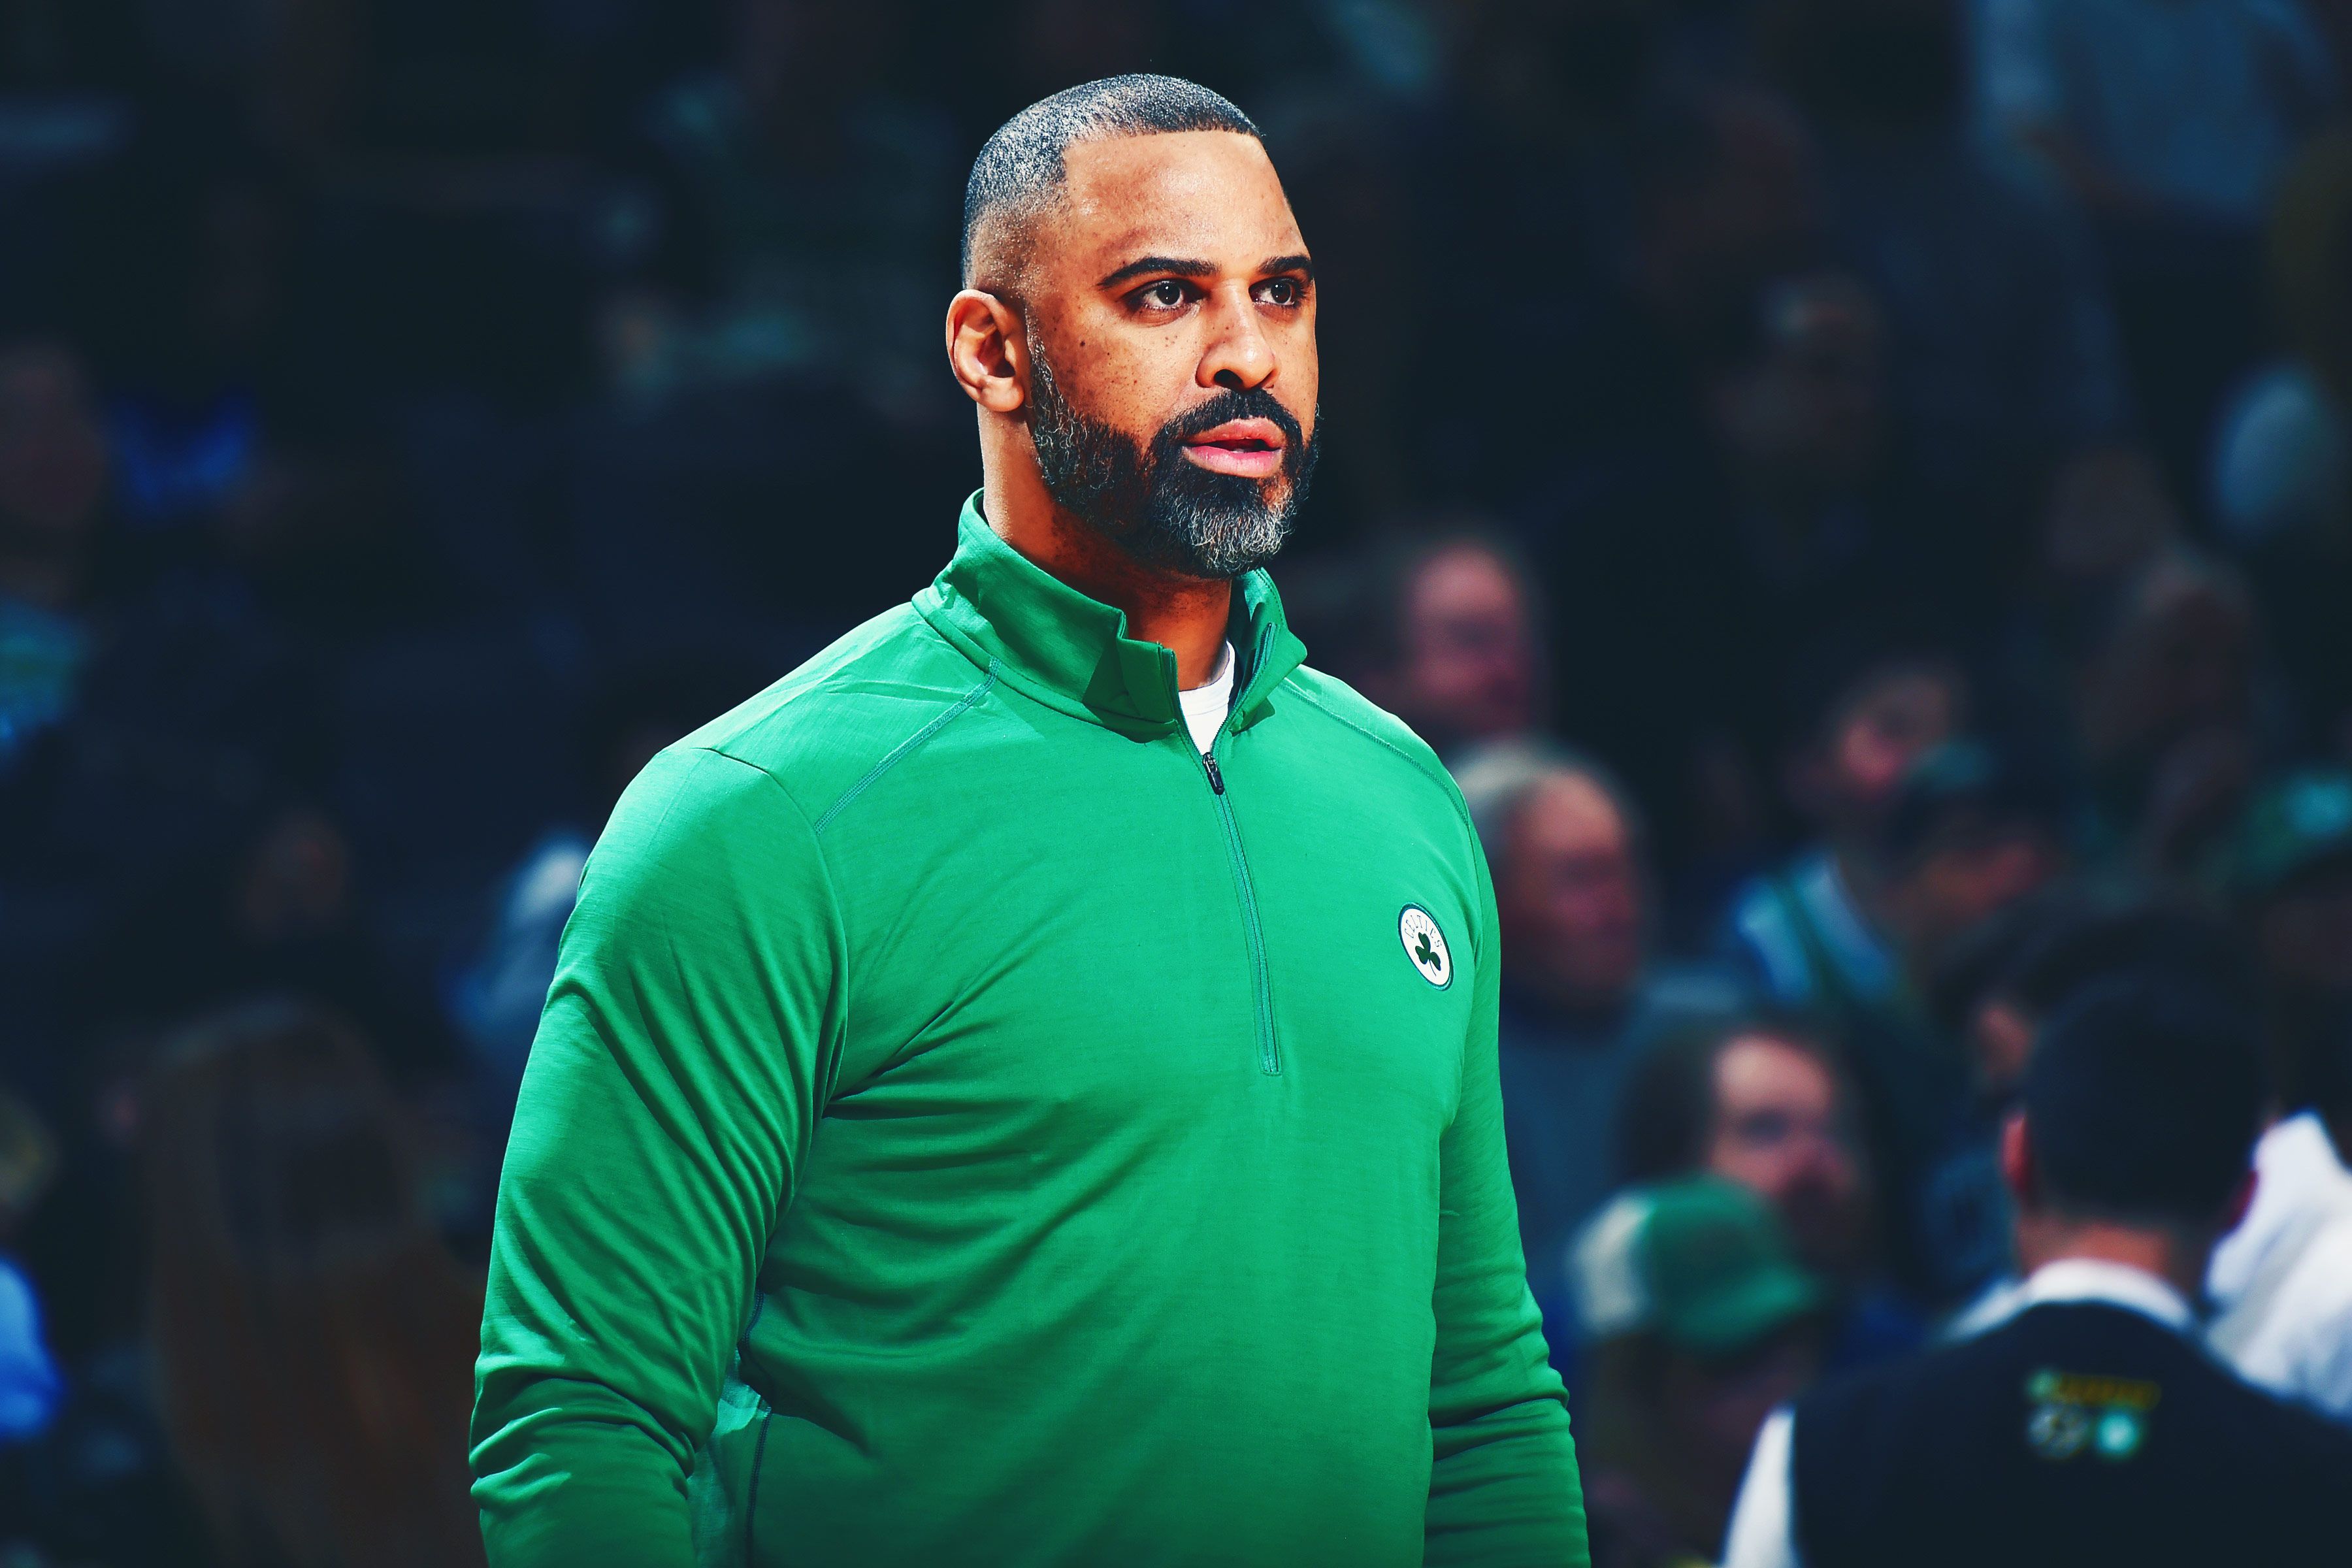 Ime Udoka Suspended From Celtics for Inappropriate Relations